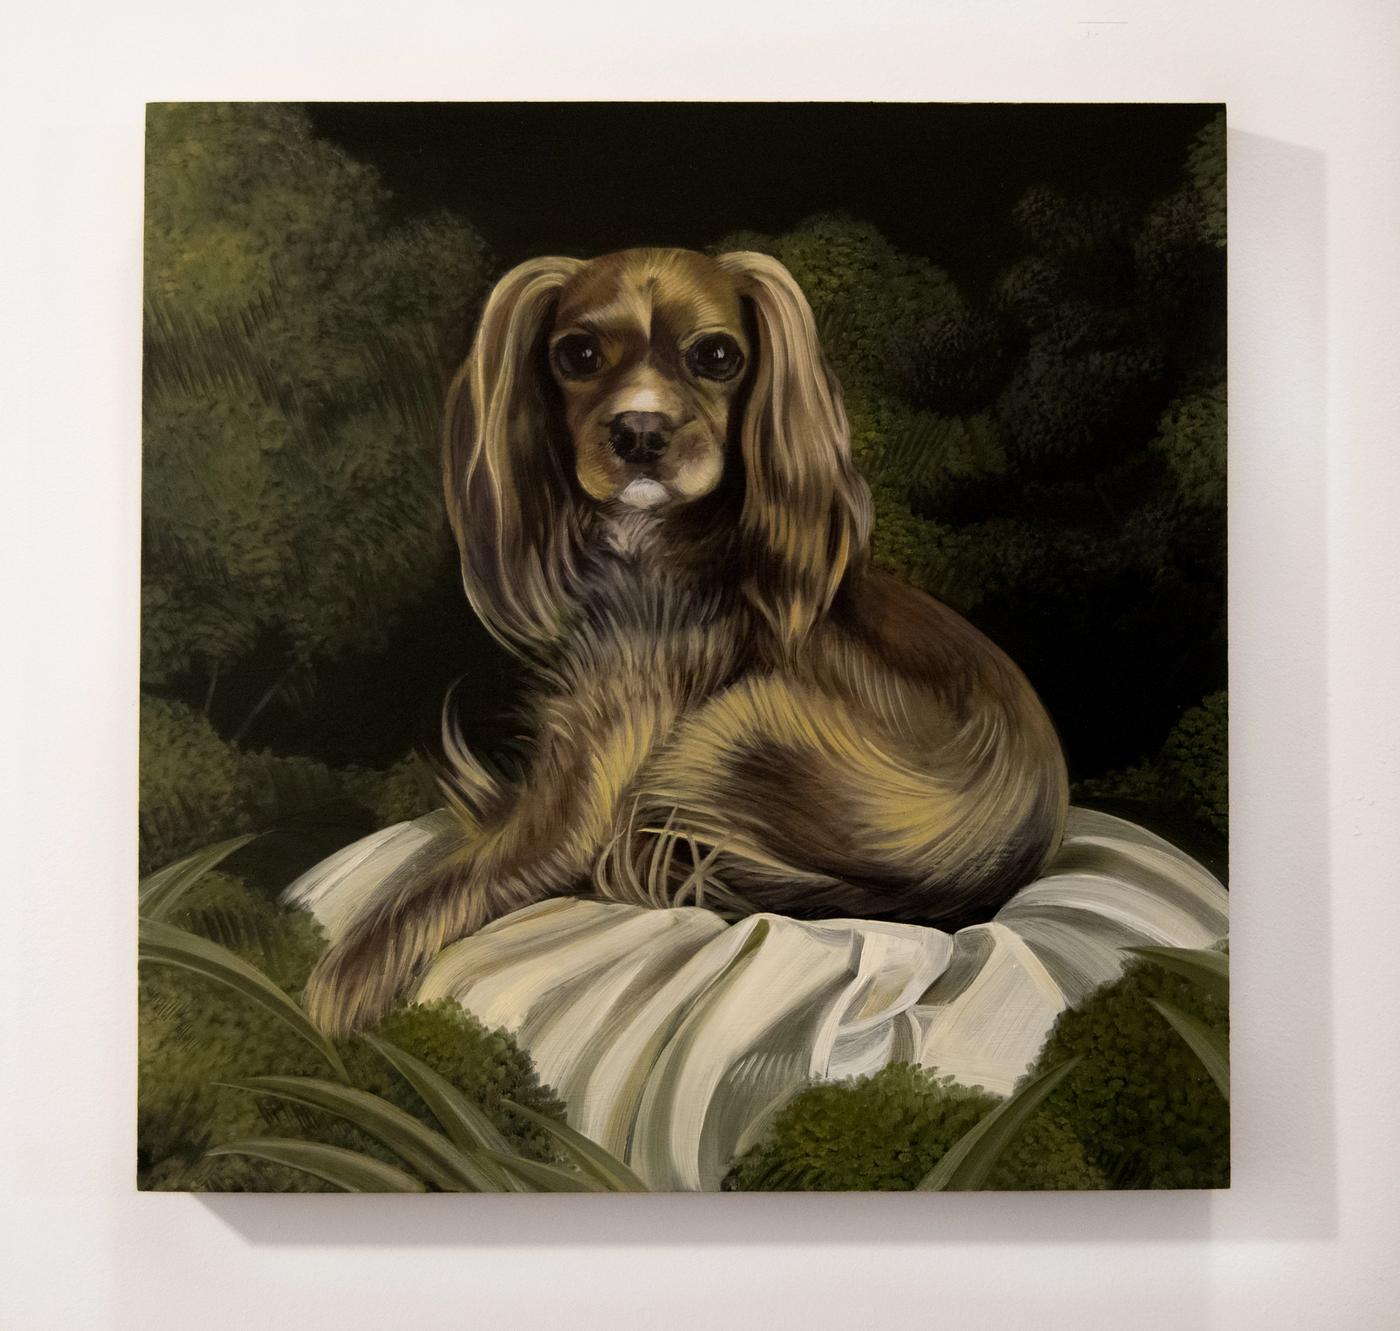 Image of Henry, 2019: Oil on panel